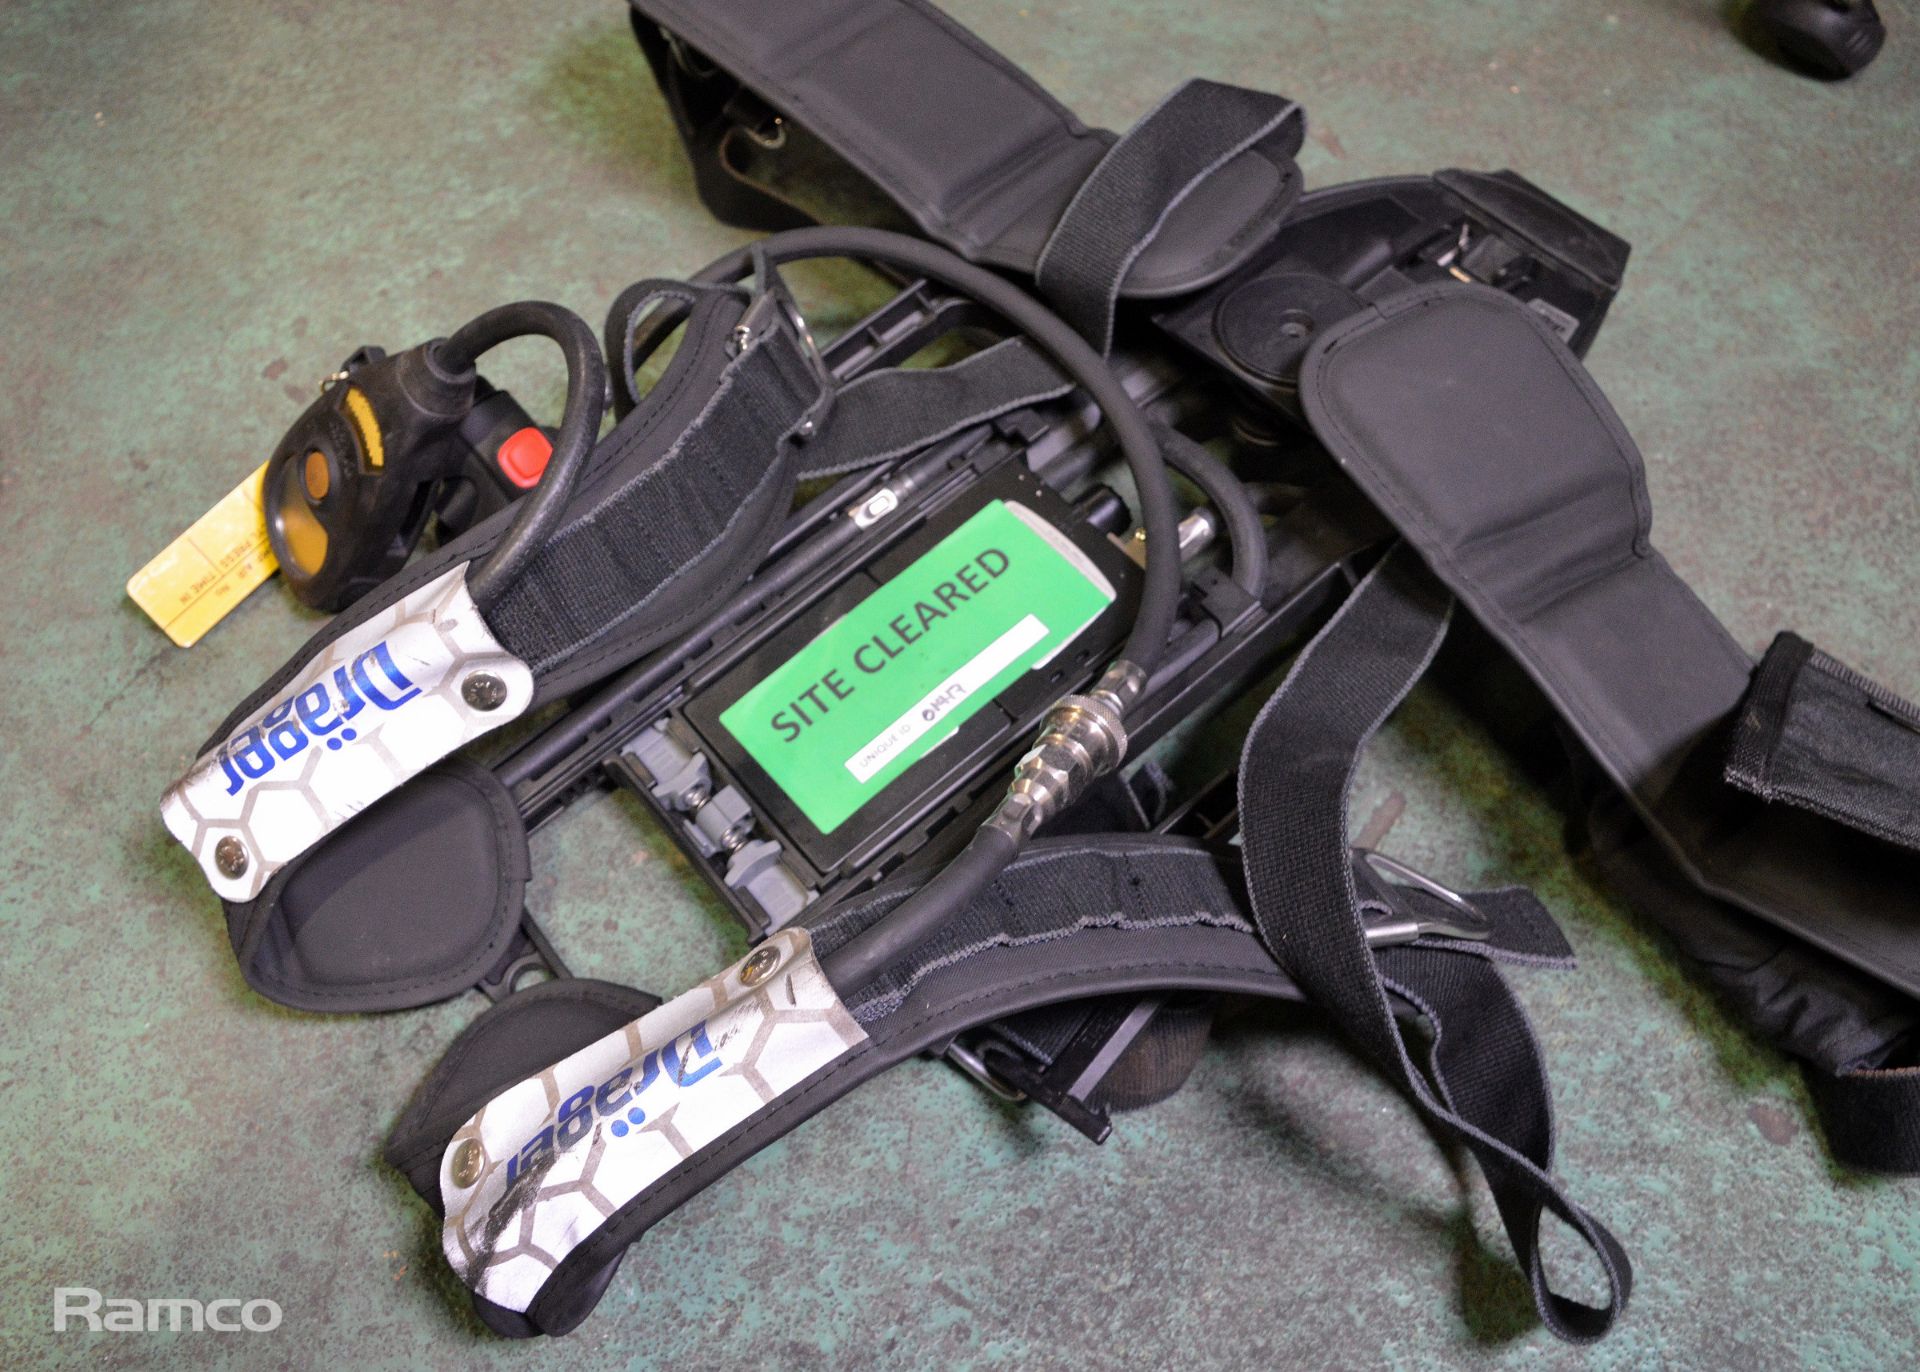 12x Drager Harness And Respirator Apparatus spares - Image 4 of 6